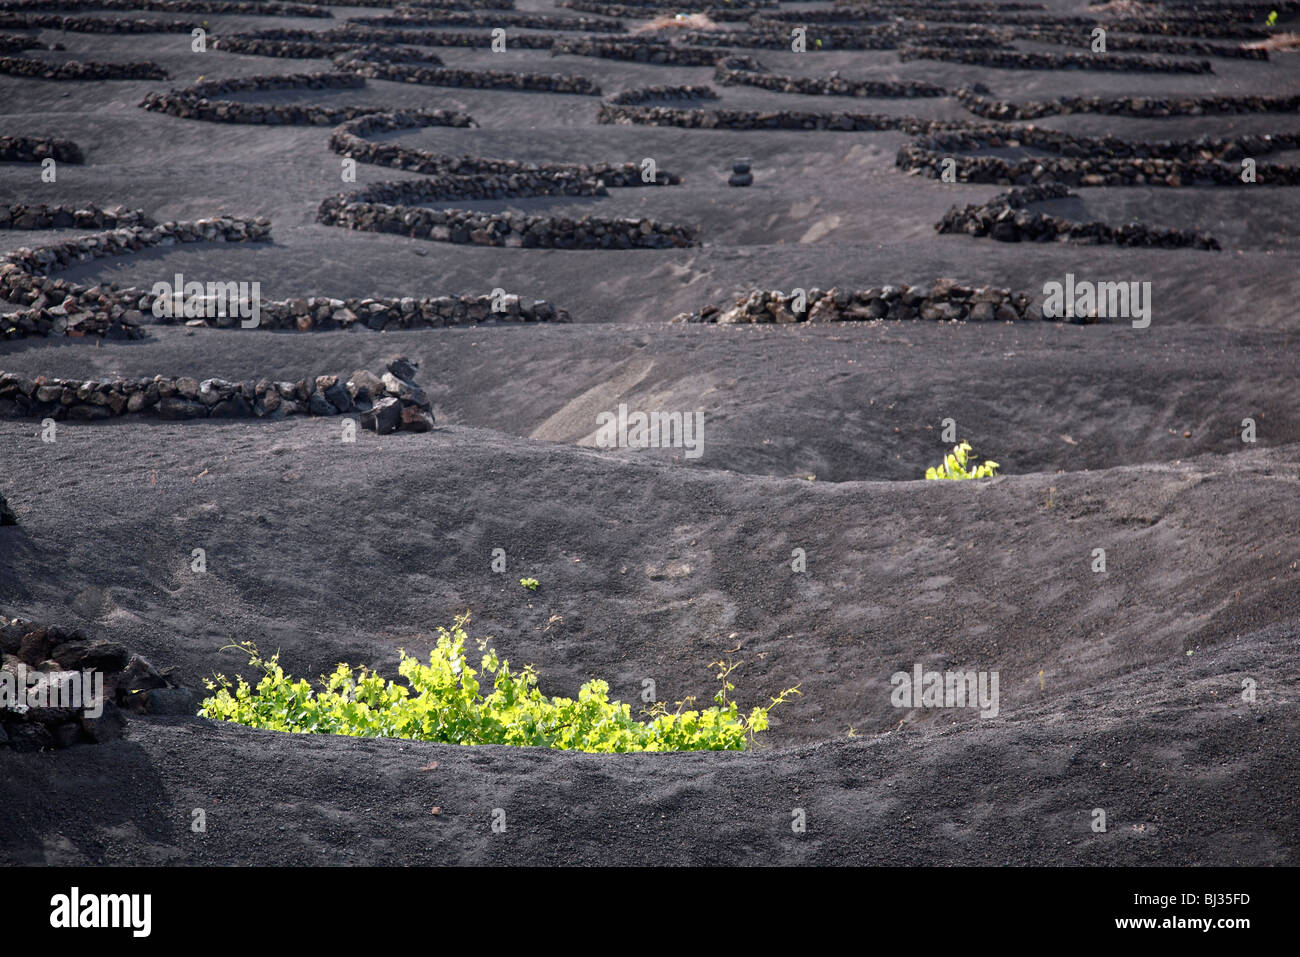 Vineyards and craters in volcanic soil dug to protect grape vines from the wind in La Geria, Lanzarote, Canary Islands, Spain Stock Photo